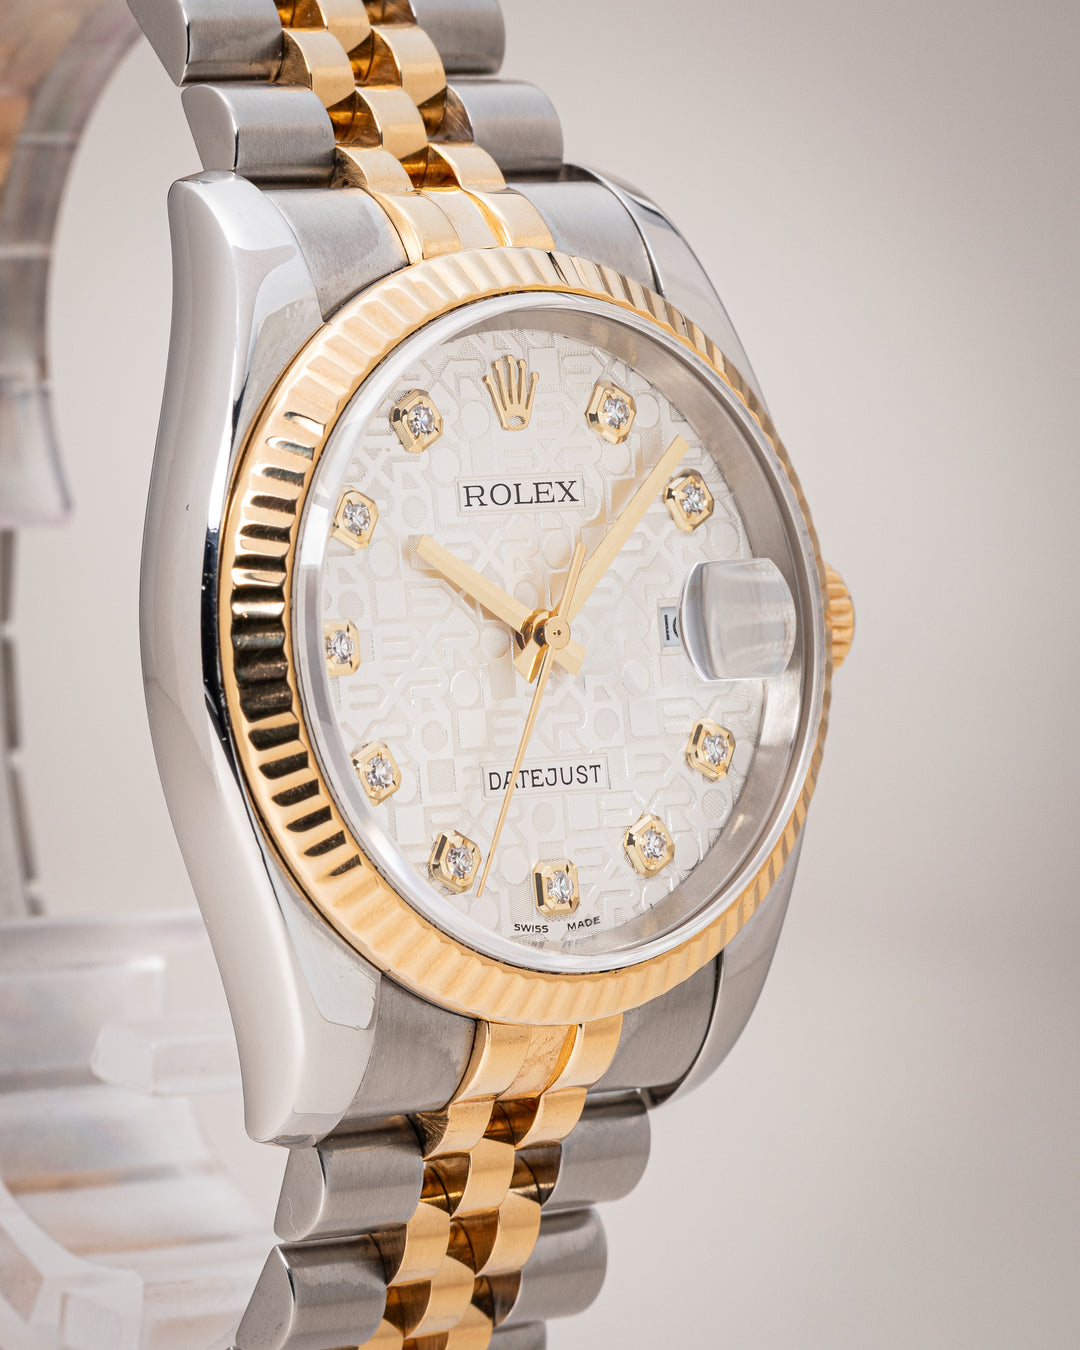 Rolex Stainless Steel and 18k Yellow Gold Datejust (116233)